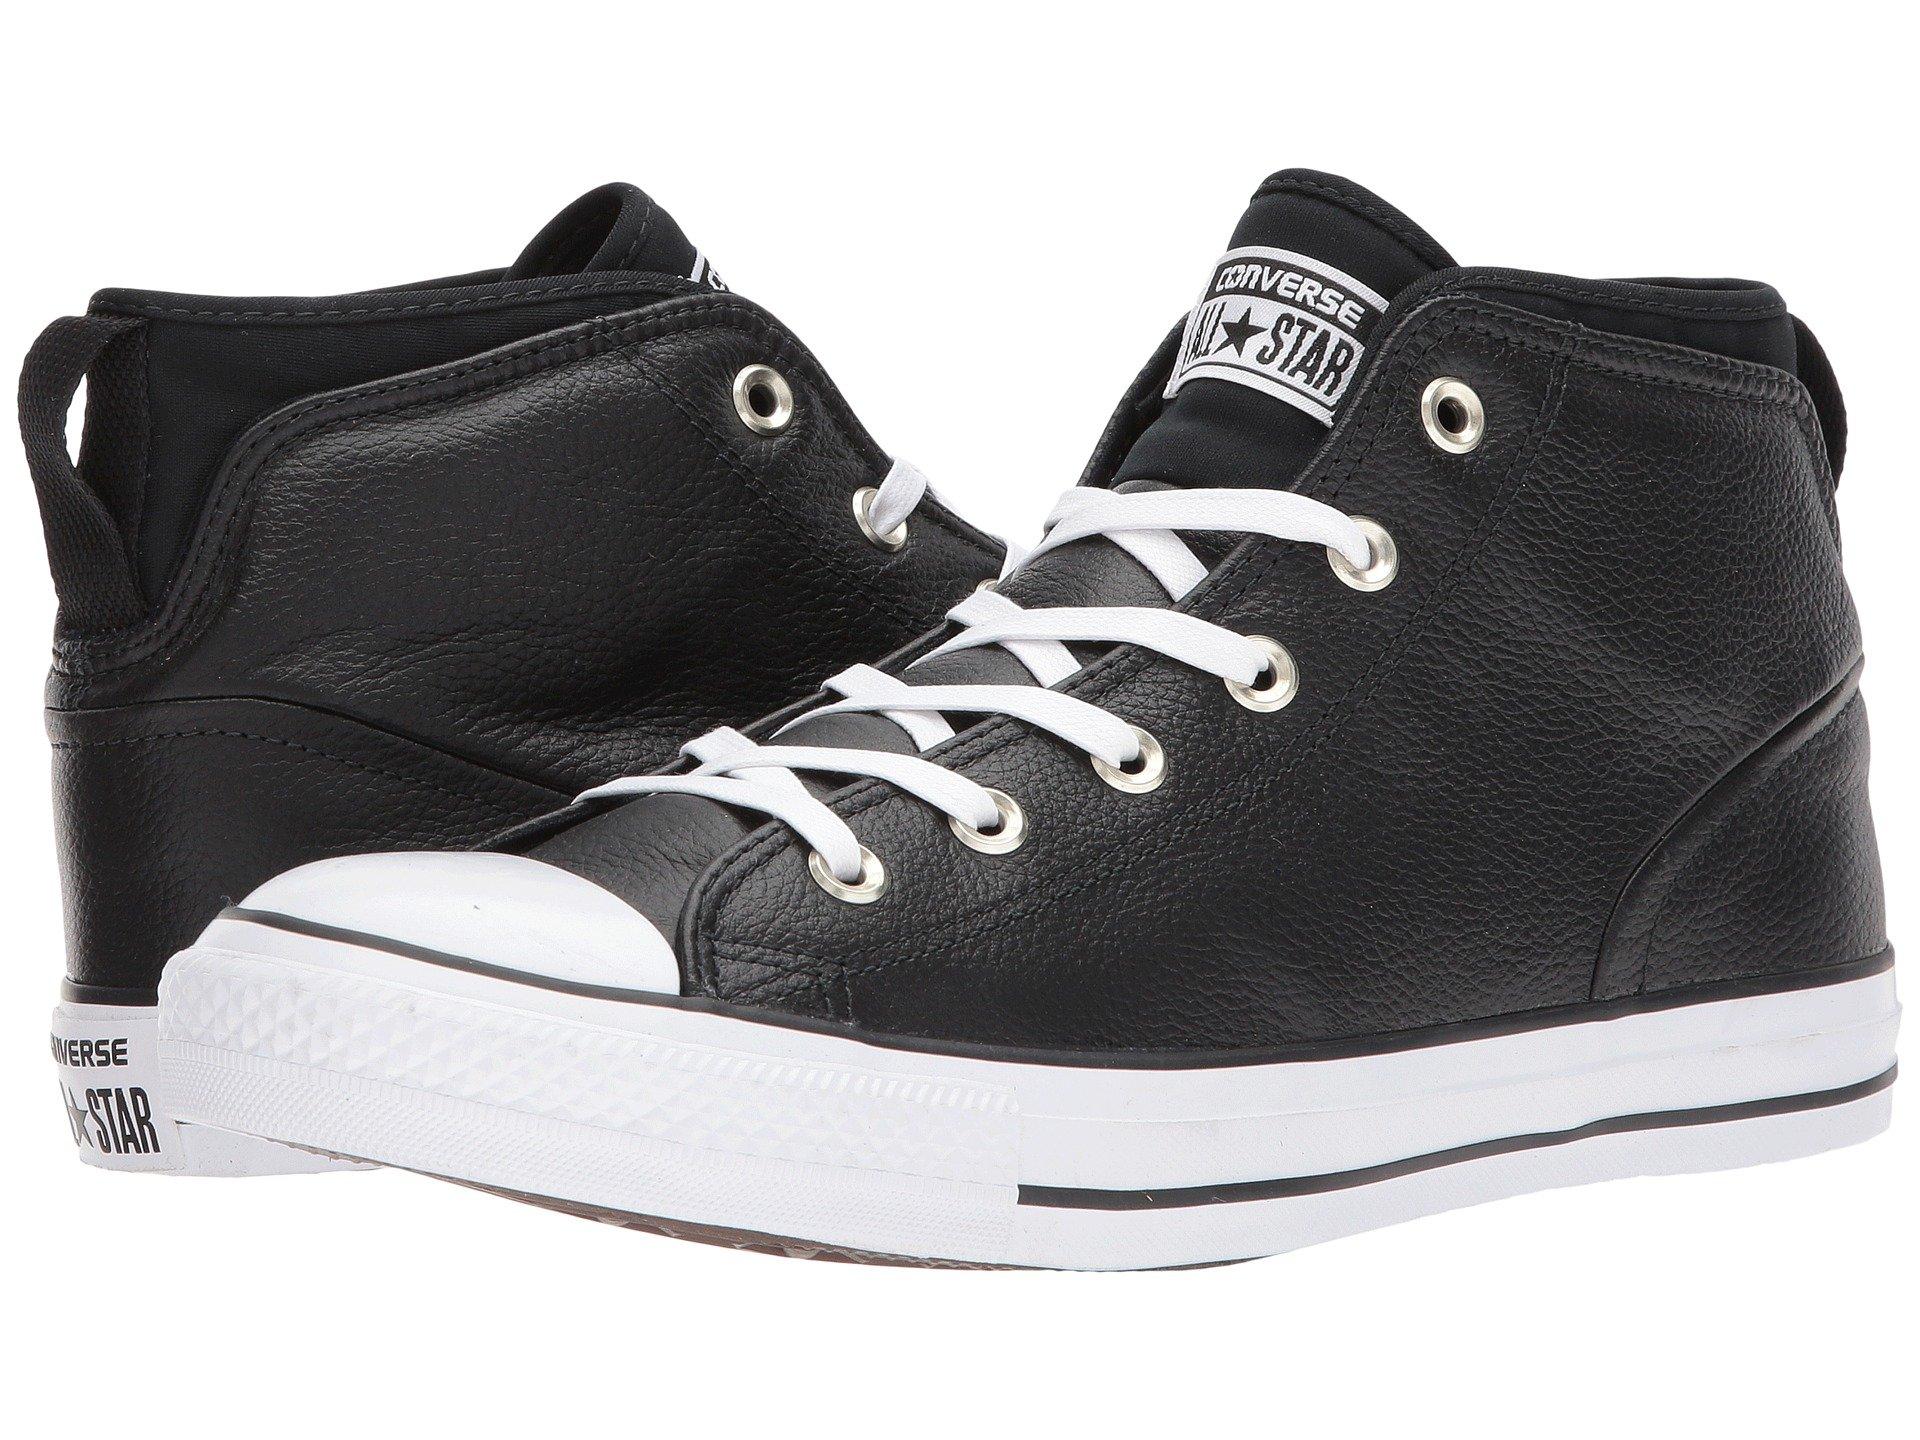 Converse Chuck Taylor All Star Syde 